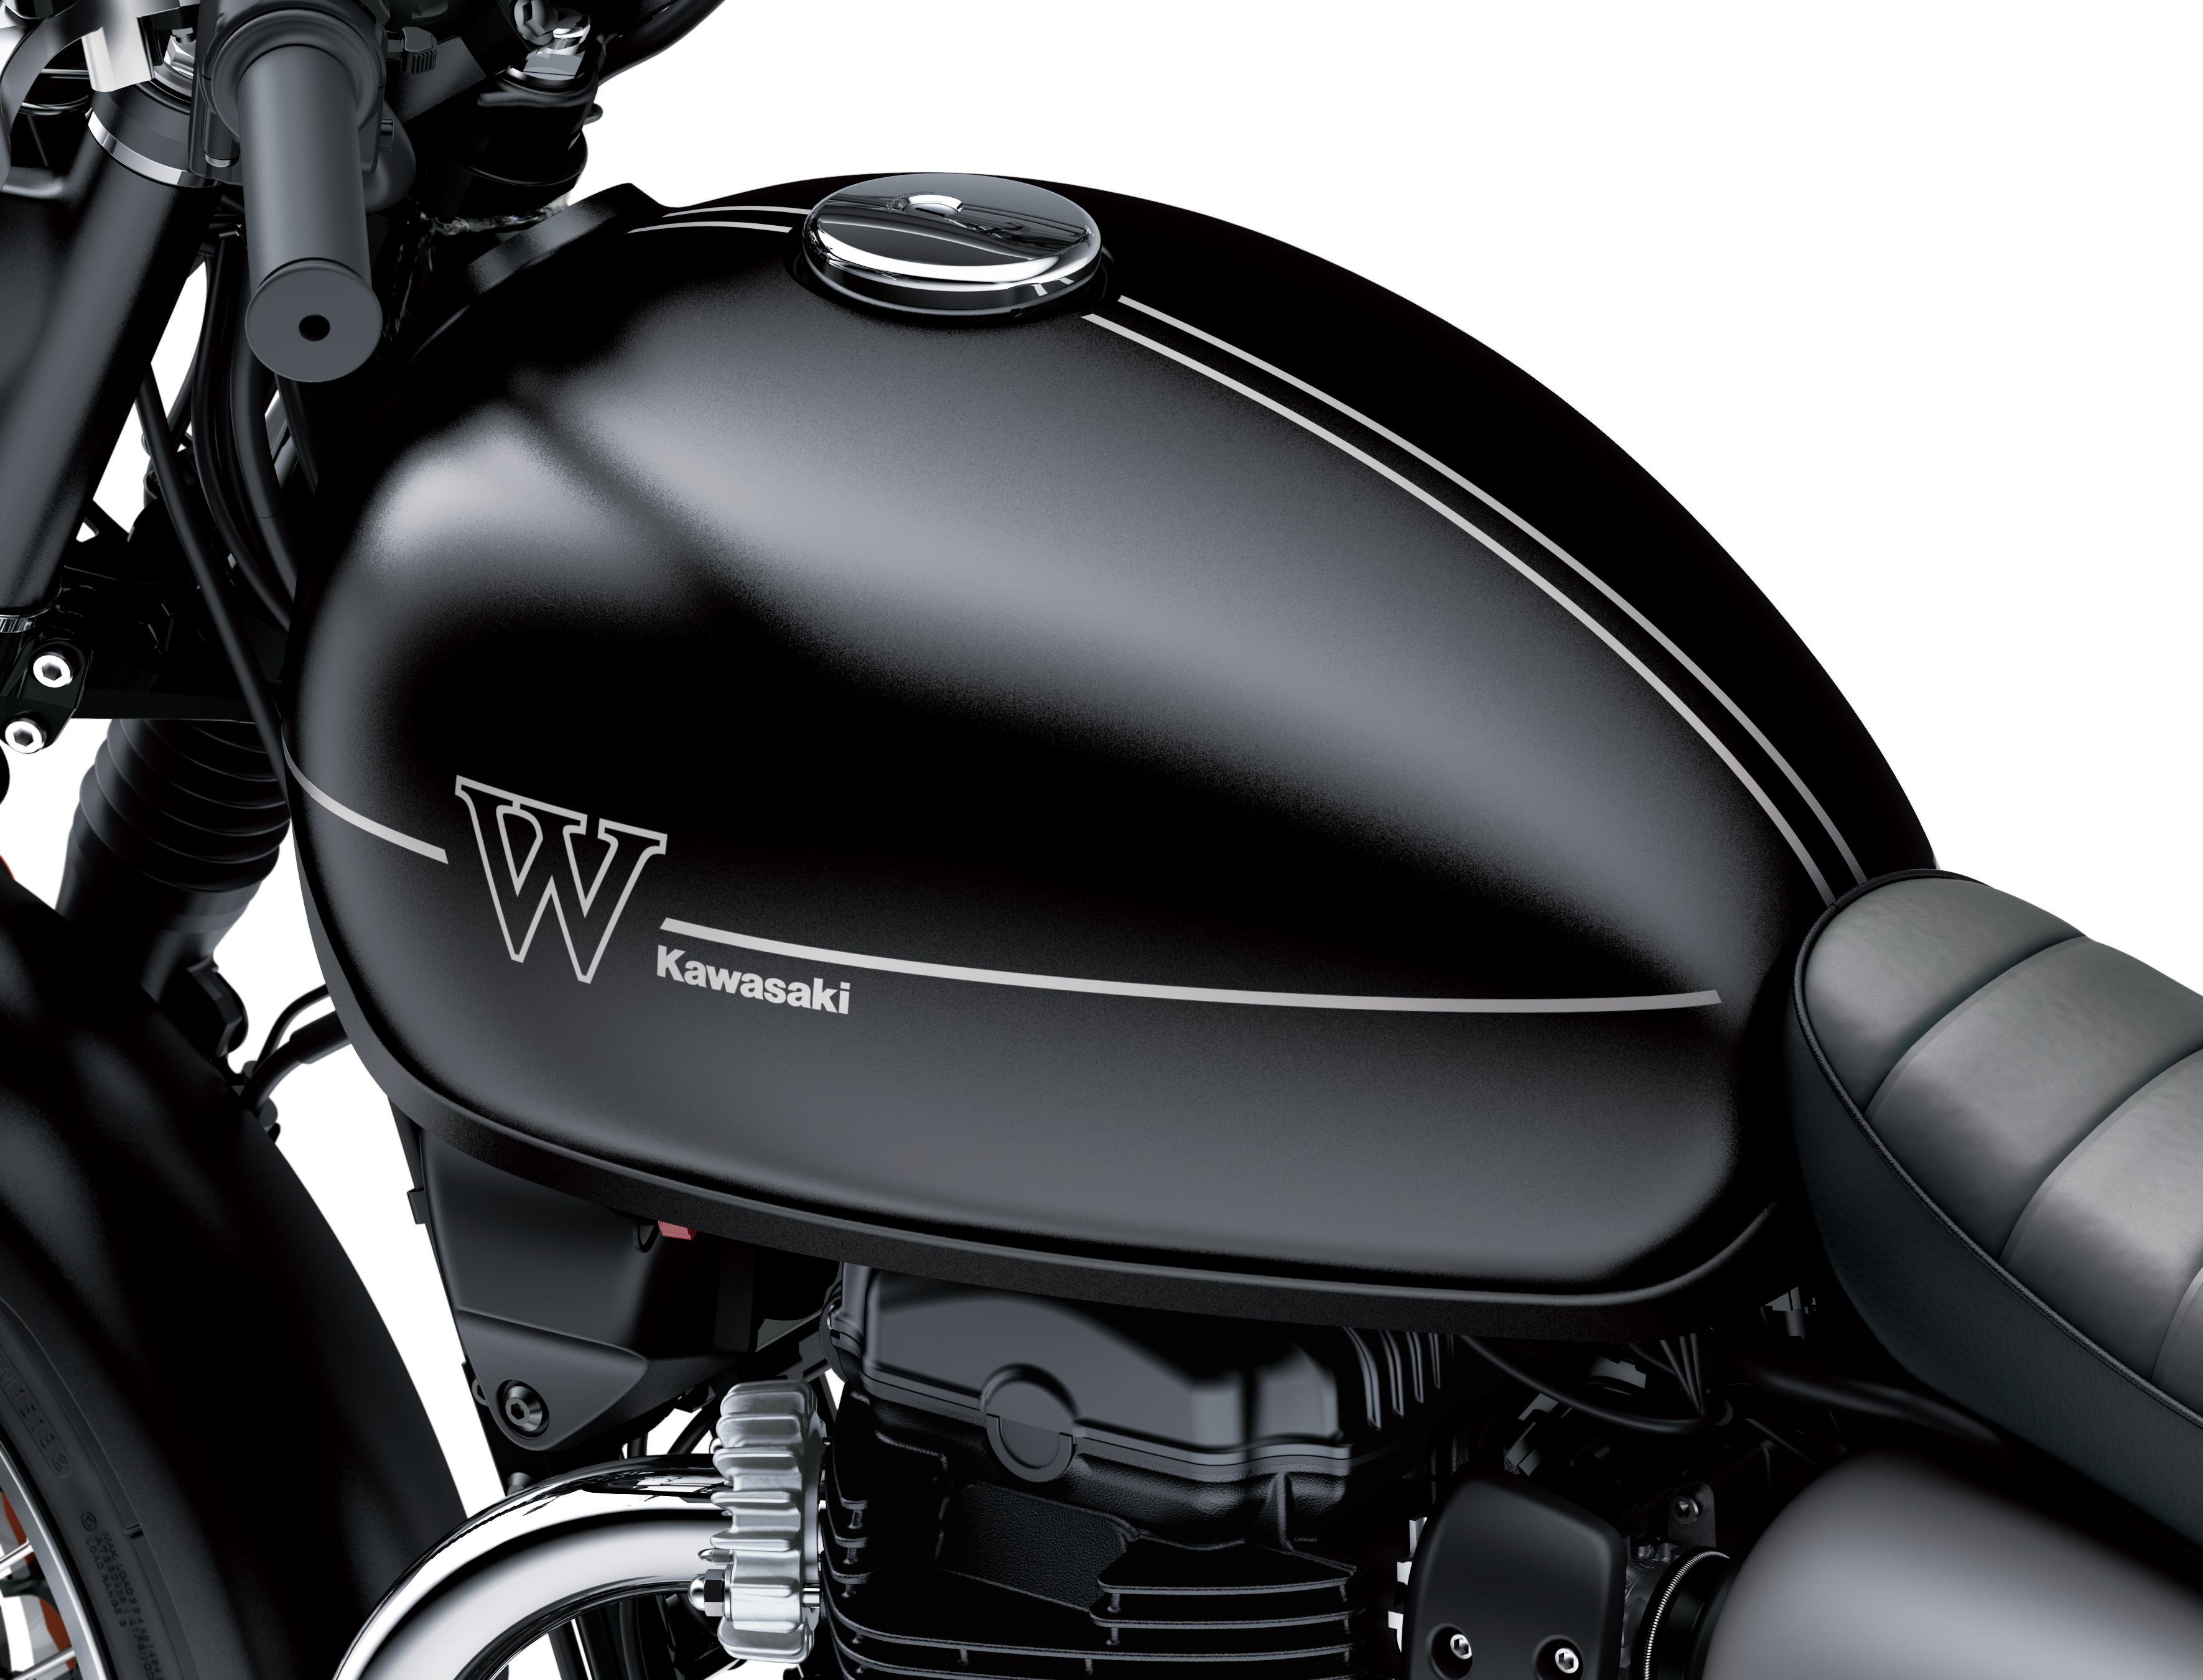 Could a Kawasaki W800 the Cafe in 2019? - webBikeWorld